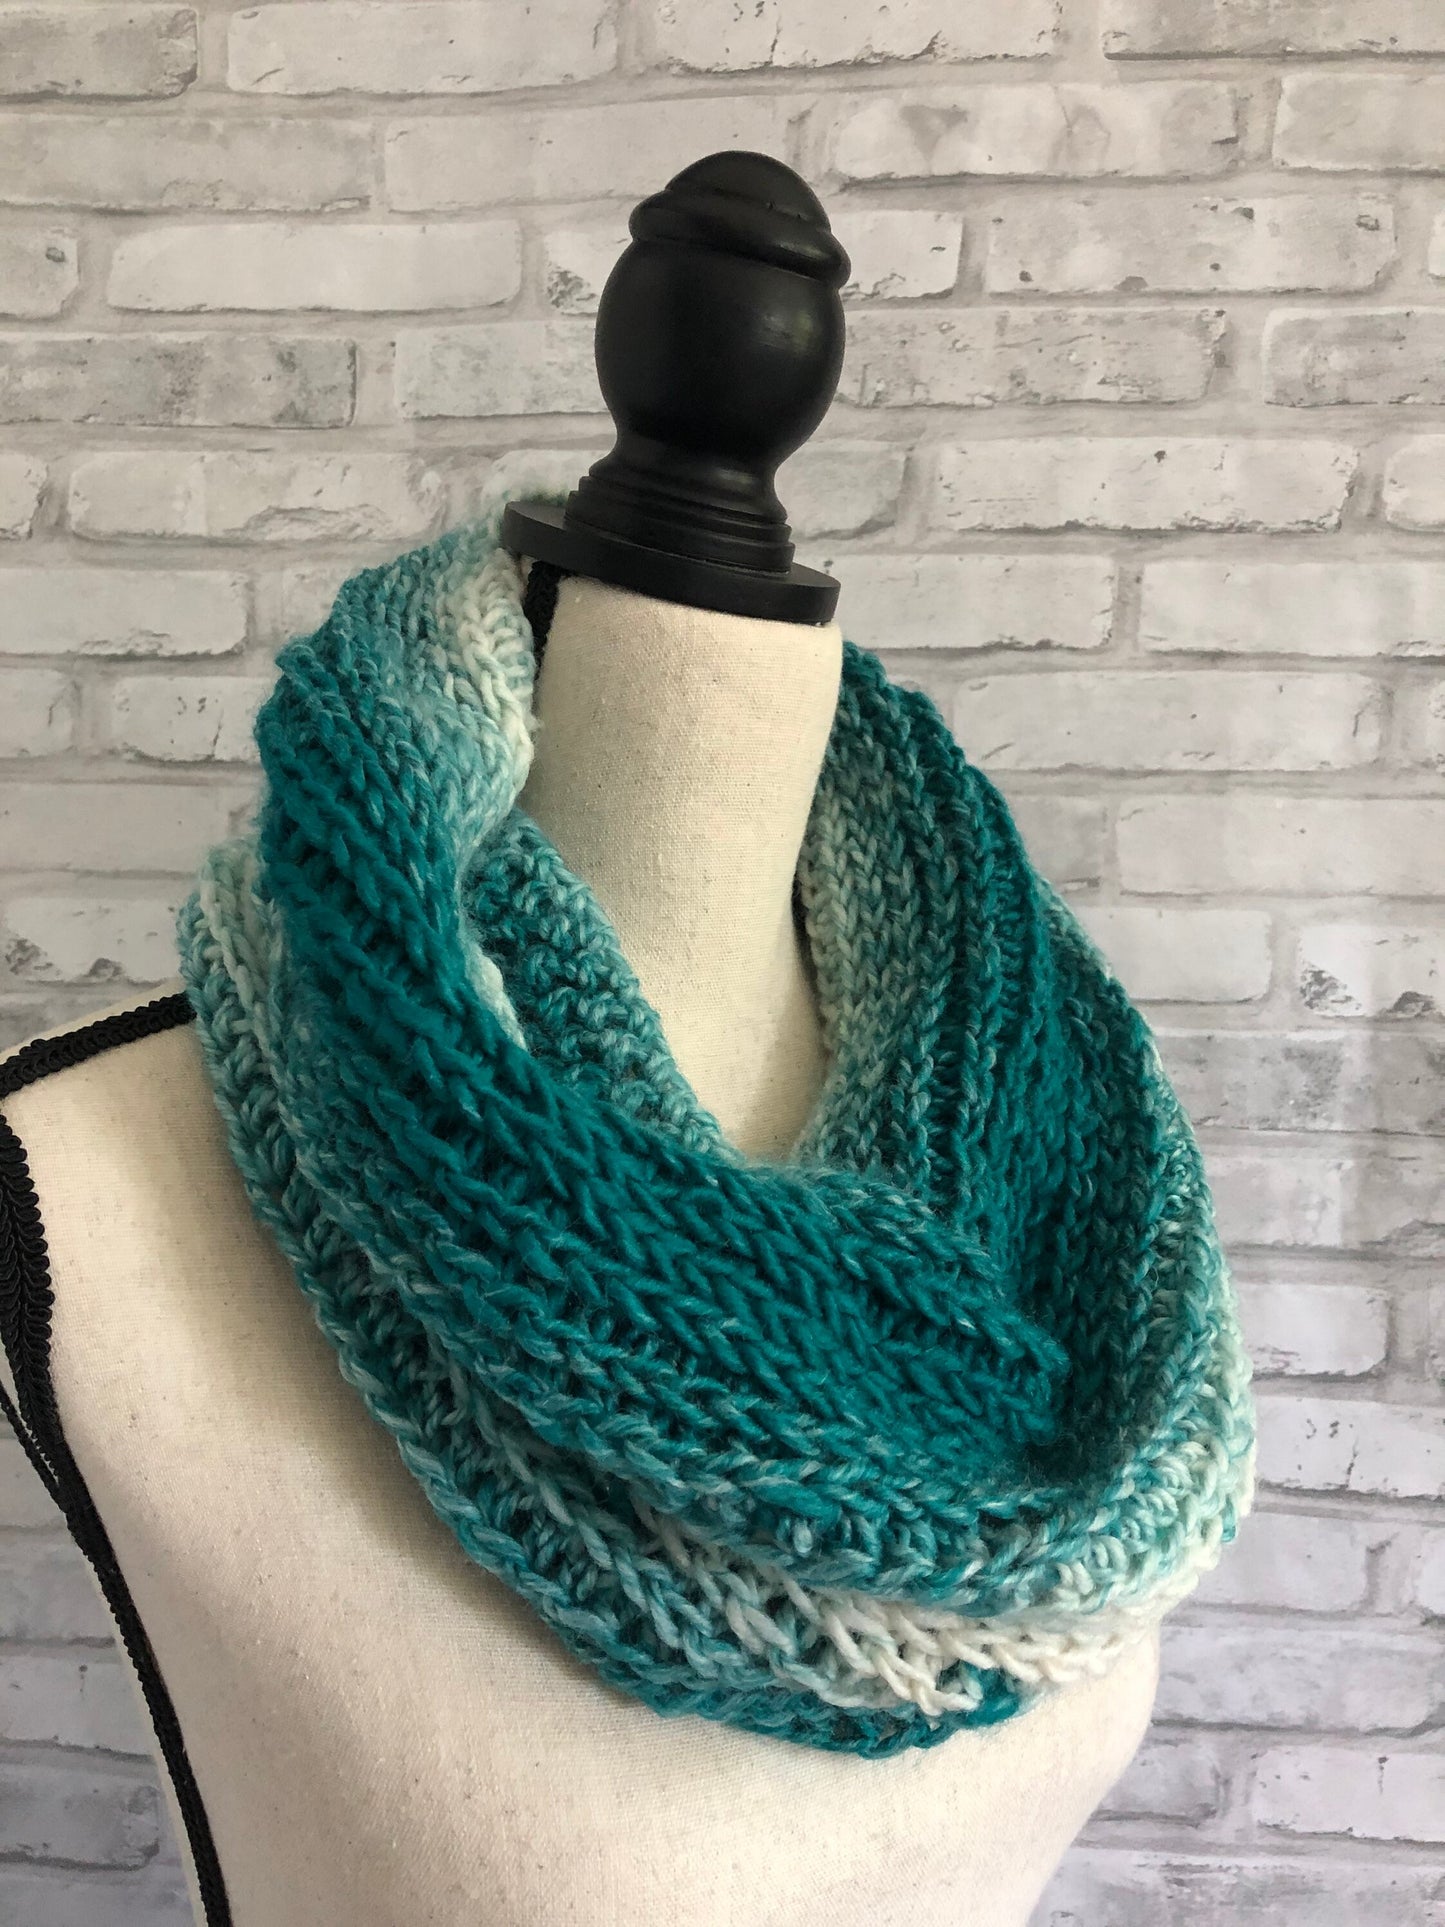 Knit Scarf. Teal Knit Scarf. Women’s Turquoise and Cream Infinity Scarf. Crochet Infinity Scarf.